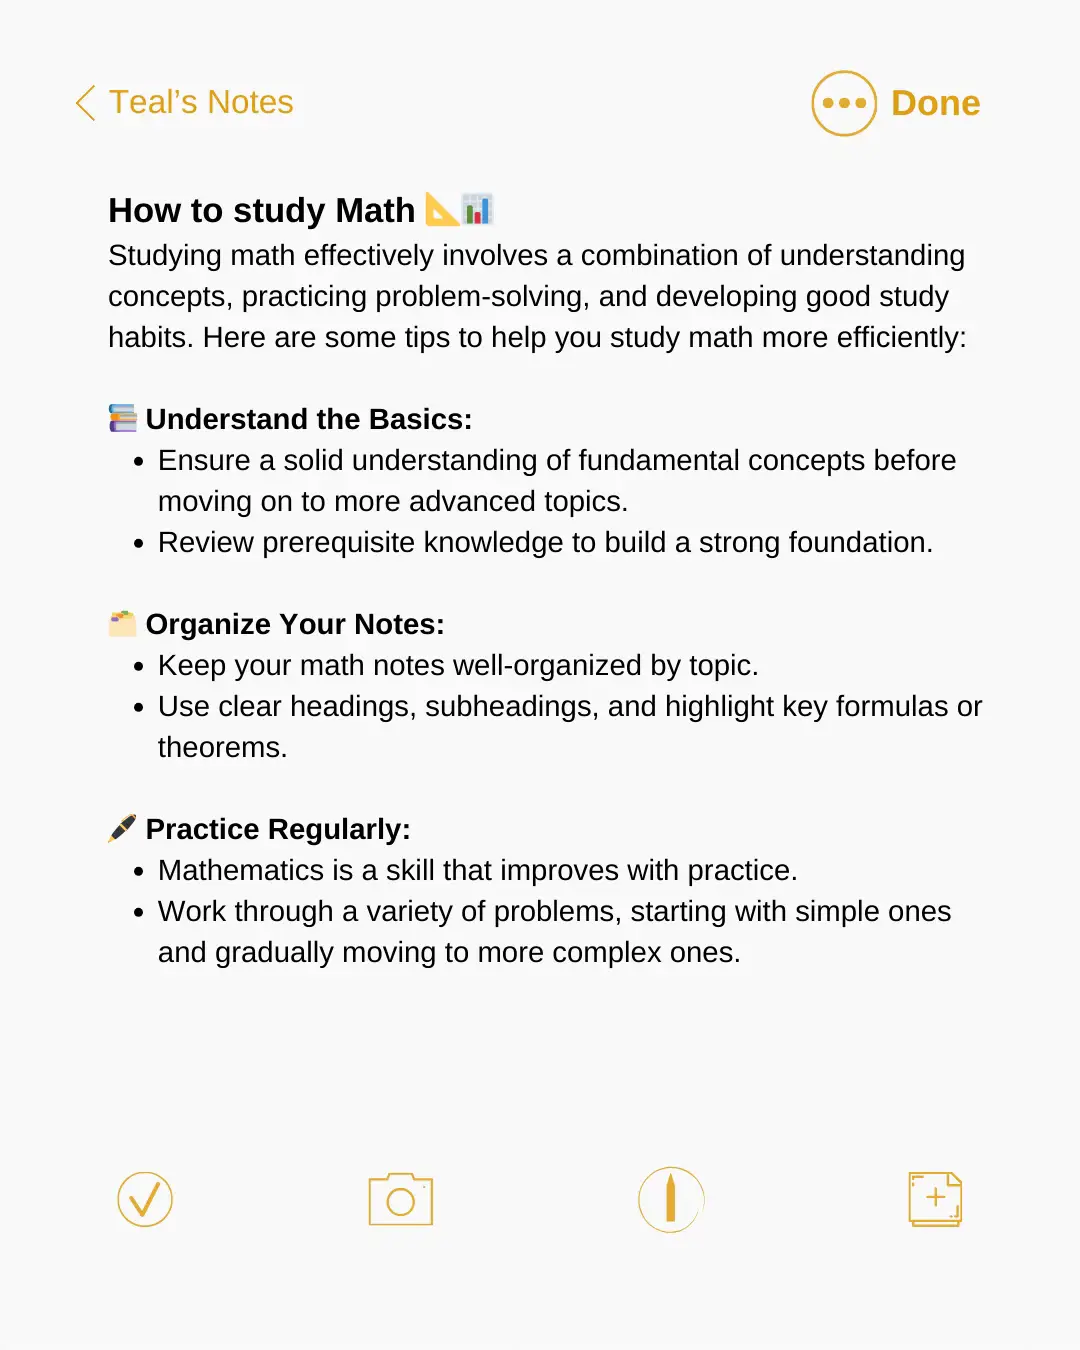  A list of tips for studying math effectively.